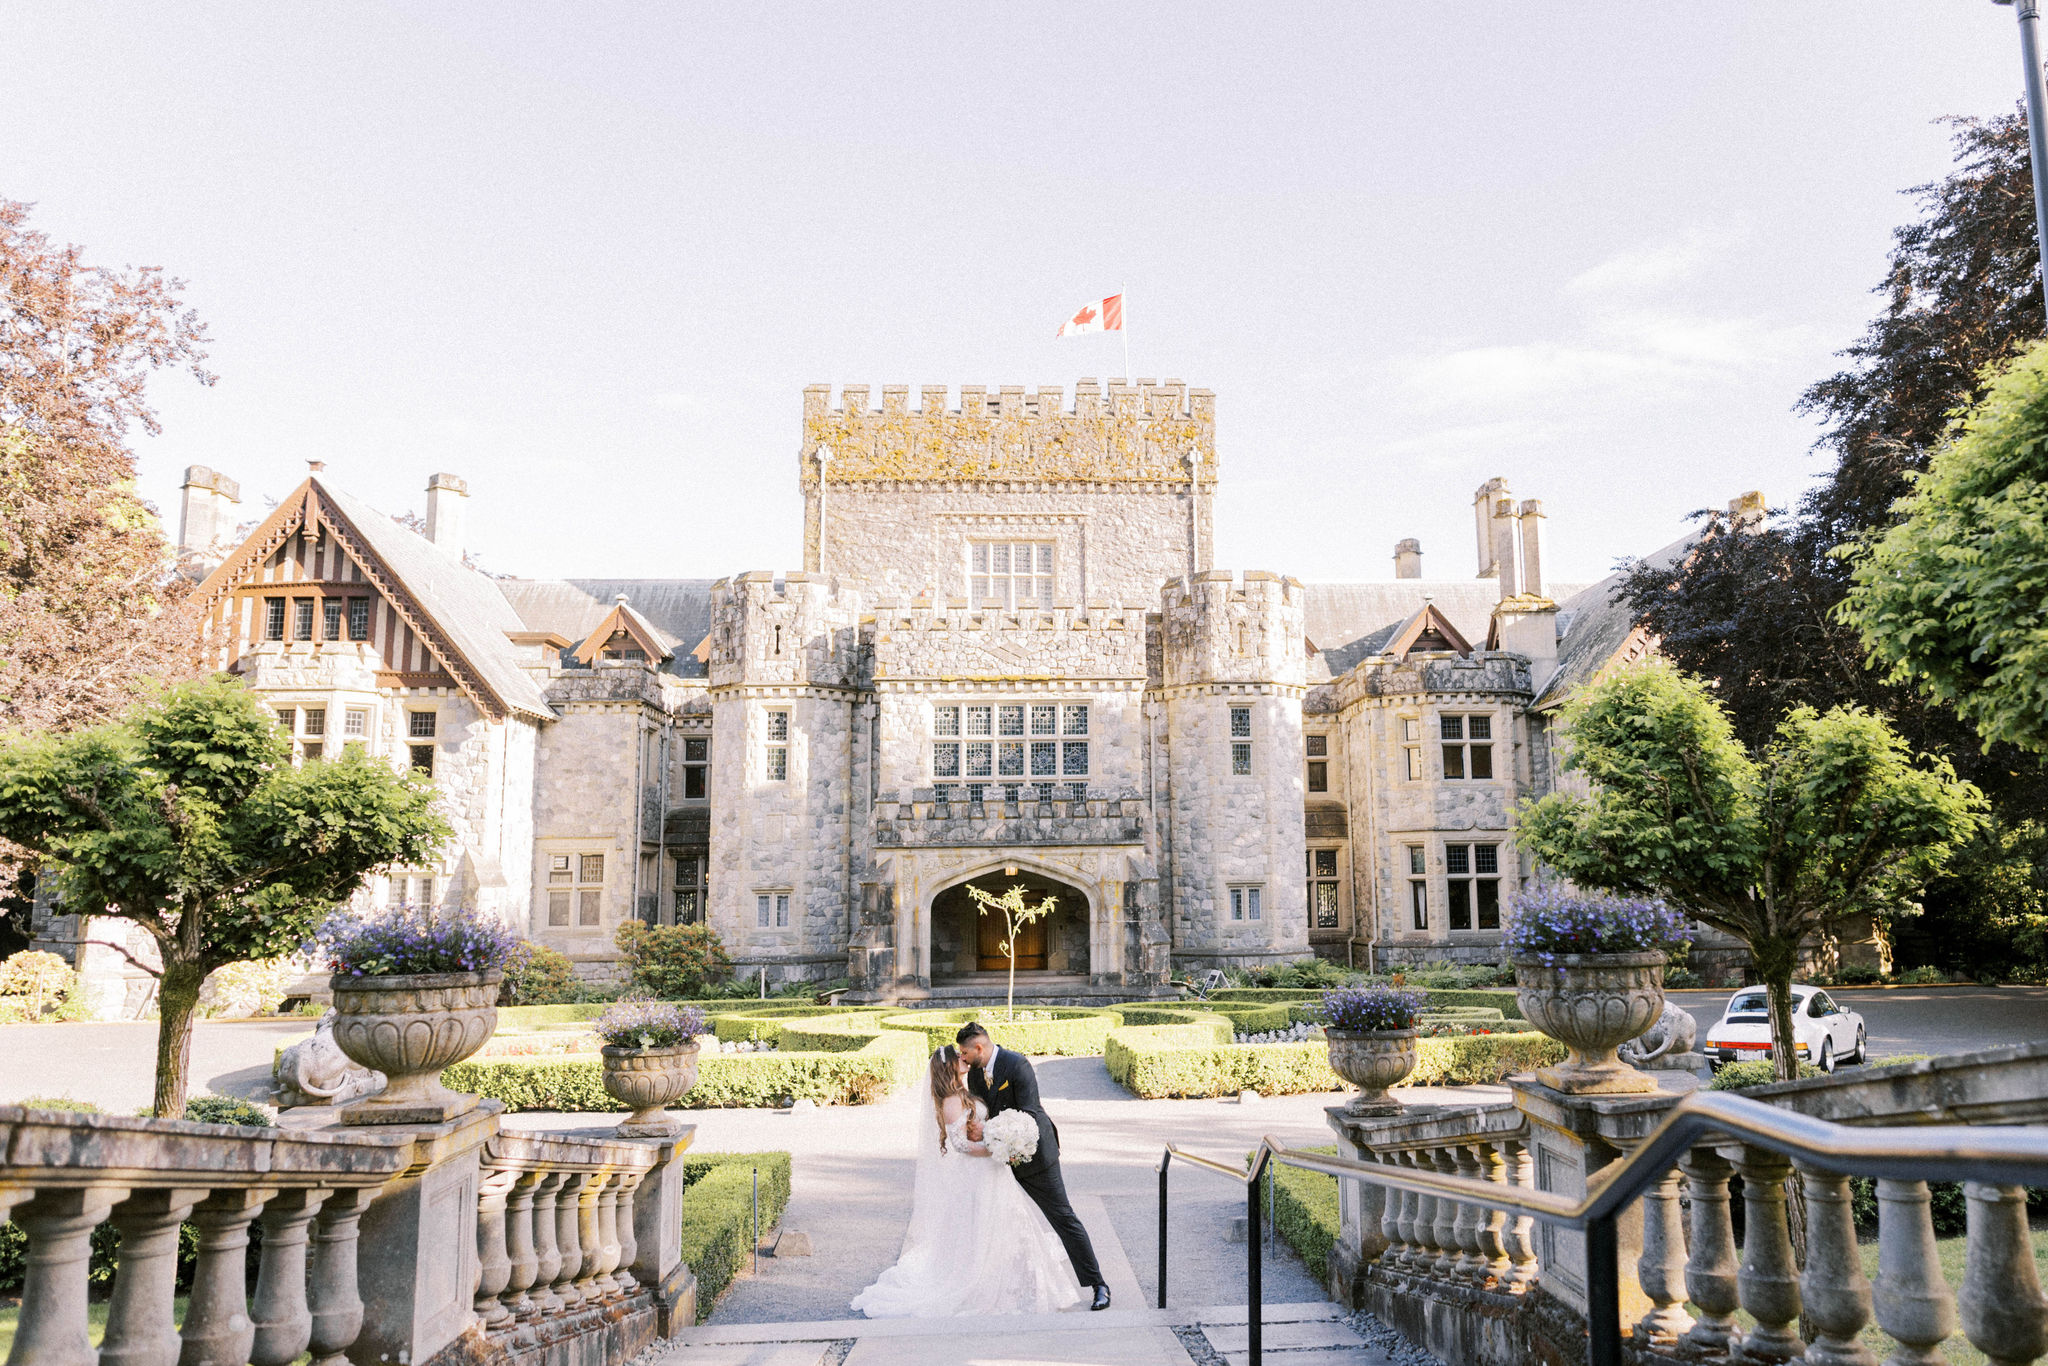 Vancouver Wedding Photographer Nicole Sarah, hatley castle, hatley castle wedding, vancouver photographer, hatley photographer, film wedding, couple kissing in front of castle